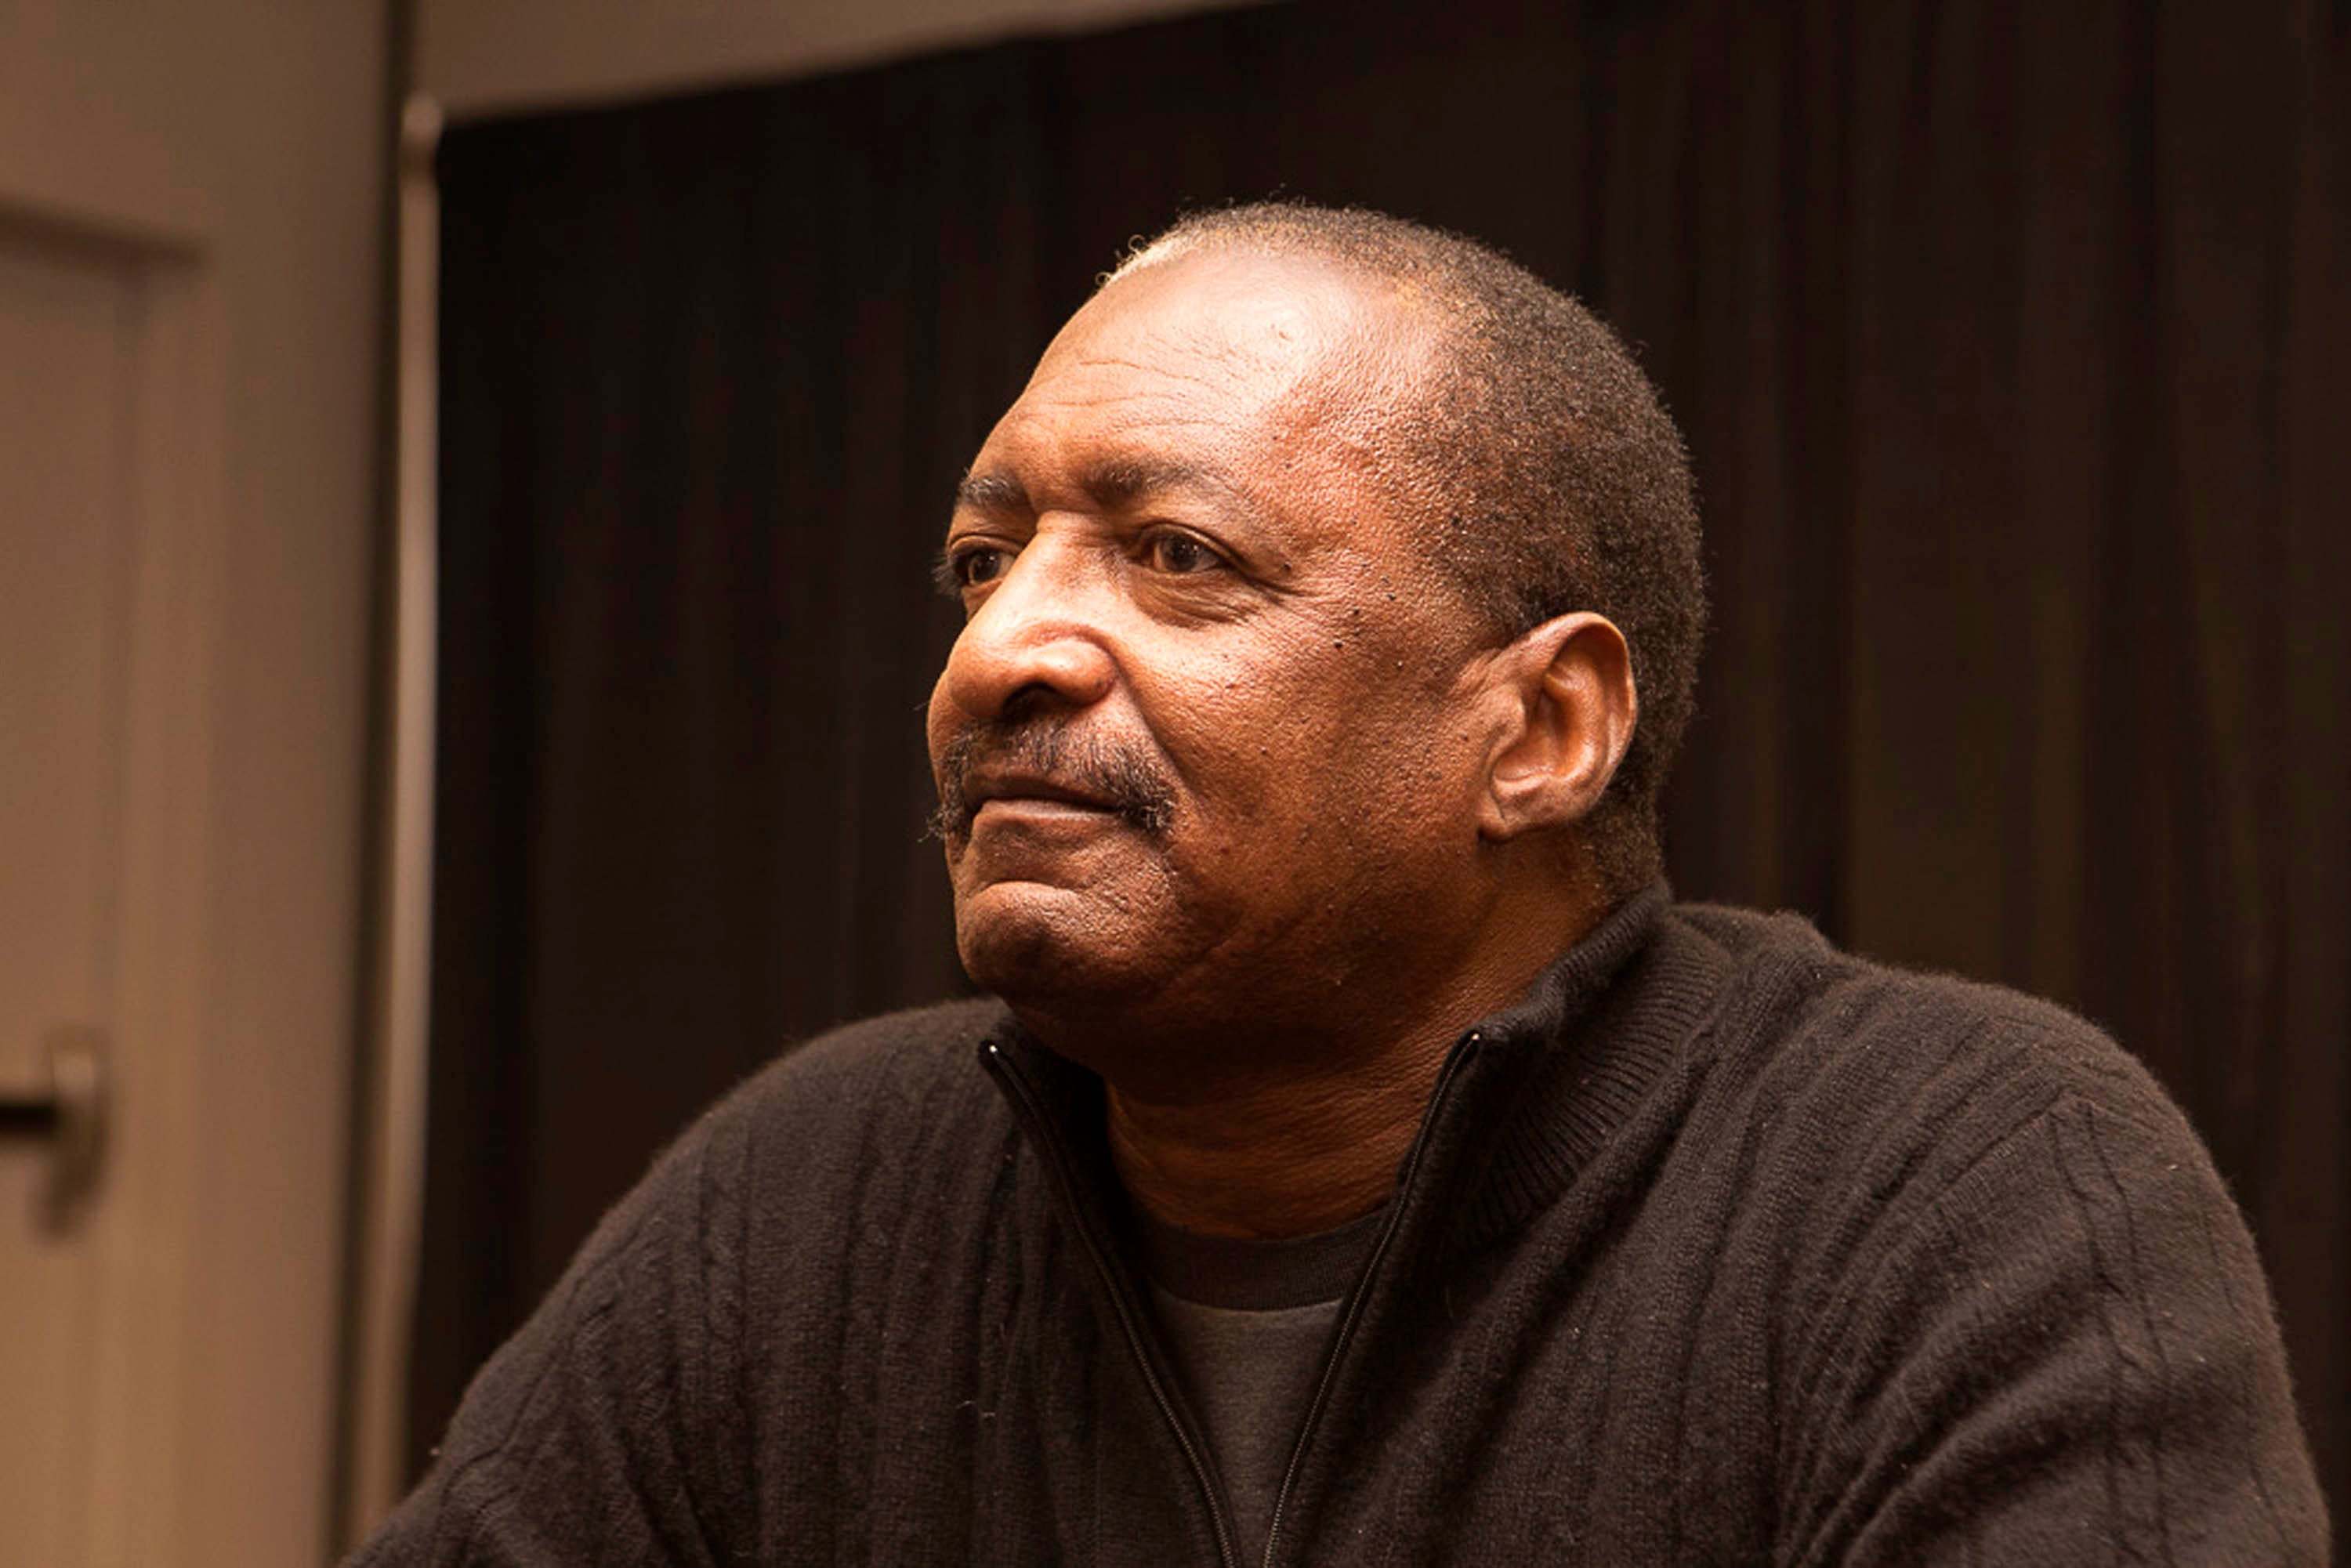 Mathew Knowles Explains Why He Revealed His Breast Cancer Diagnosis: 'Men Want To Keep It Hidden'